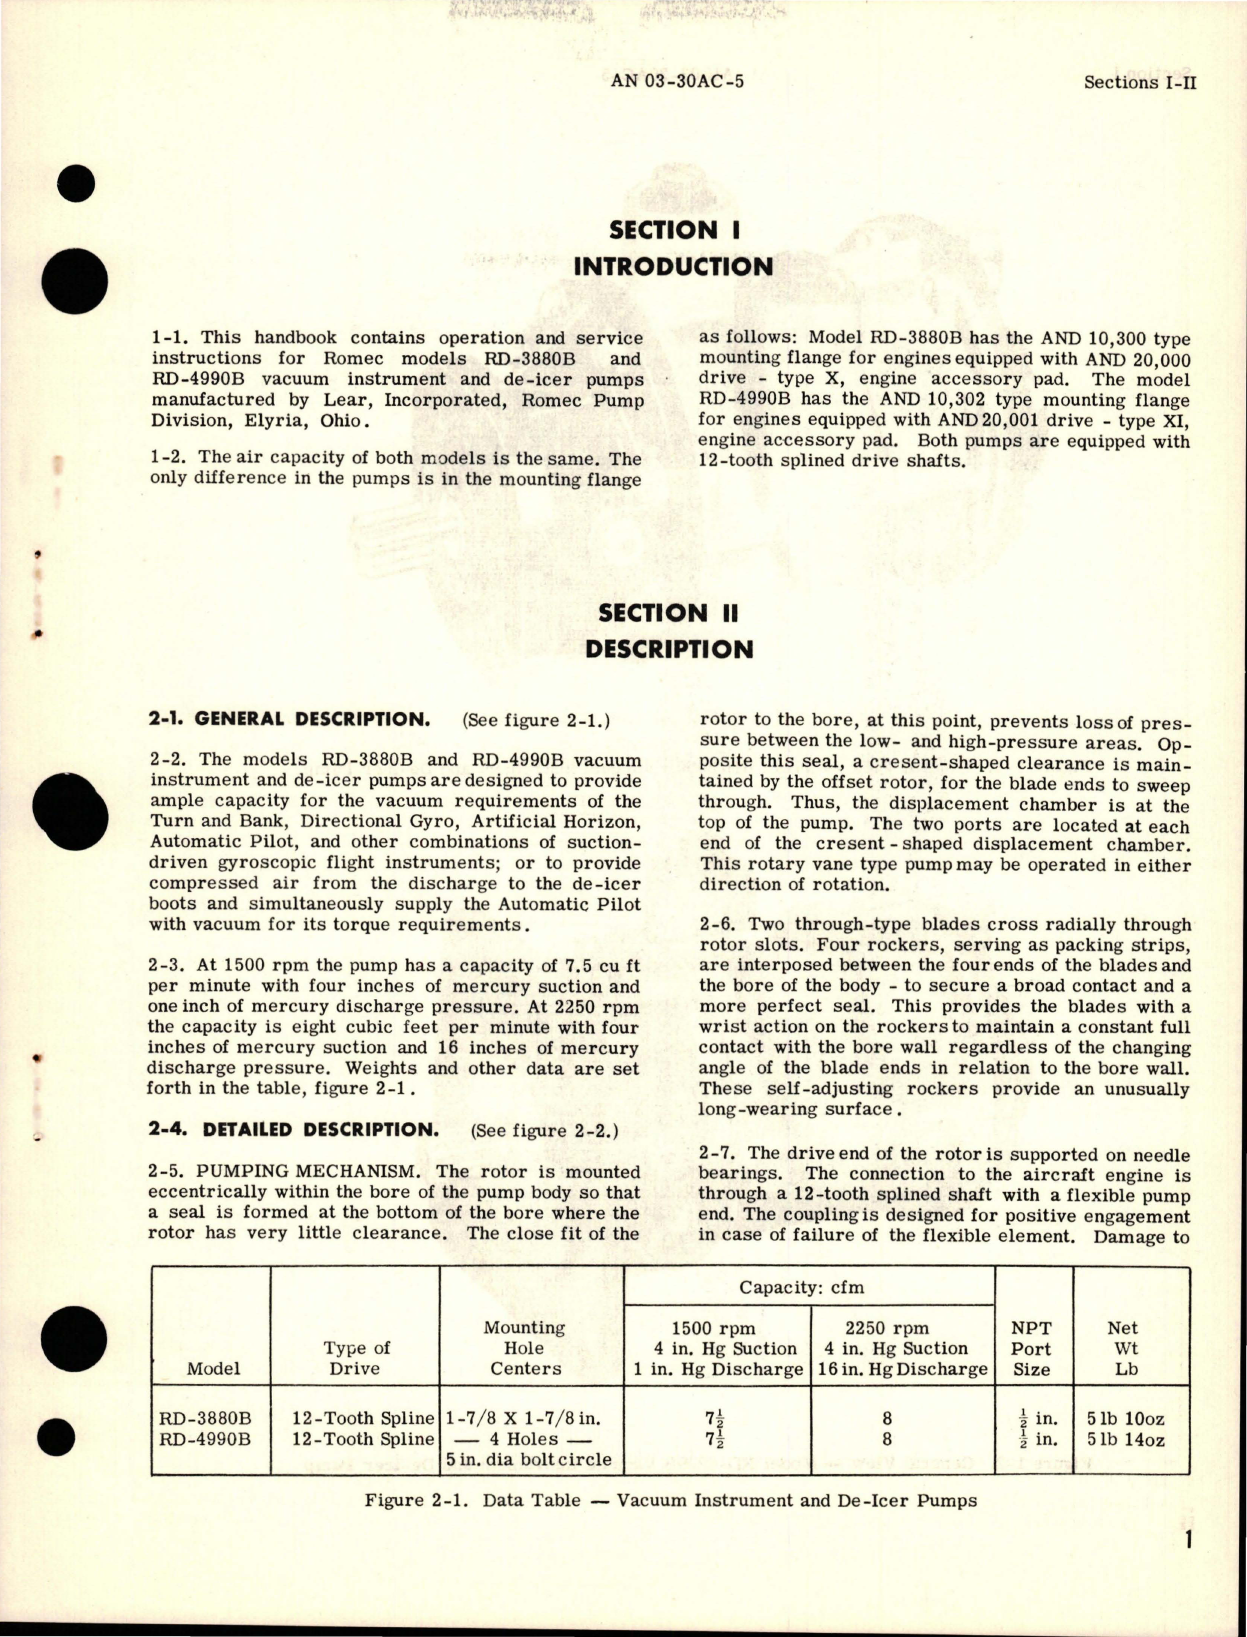 Sample page 5 from AirCorps Library document: Operation and Service Instructions for Vacuum Instrument & De-Icer Pumps - Models RD 3880B and RD 4990B